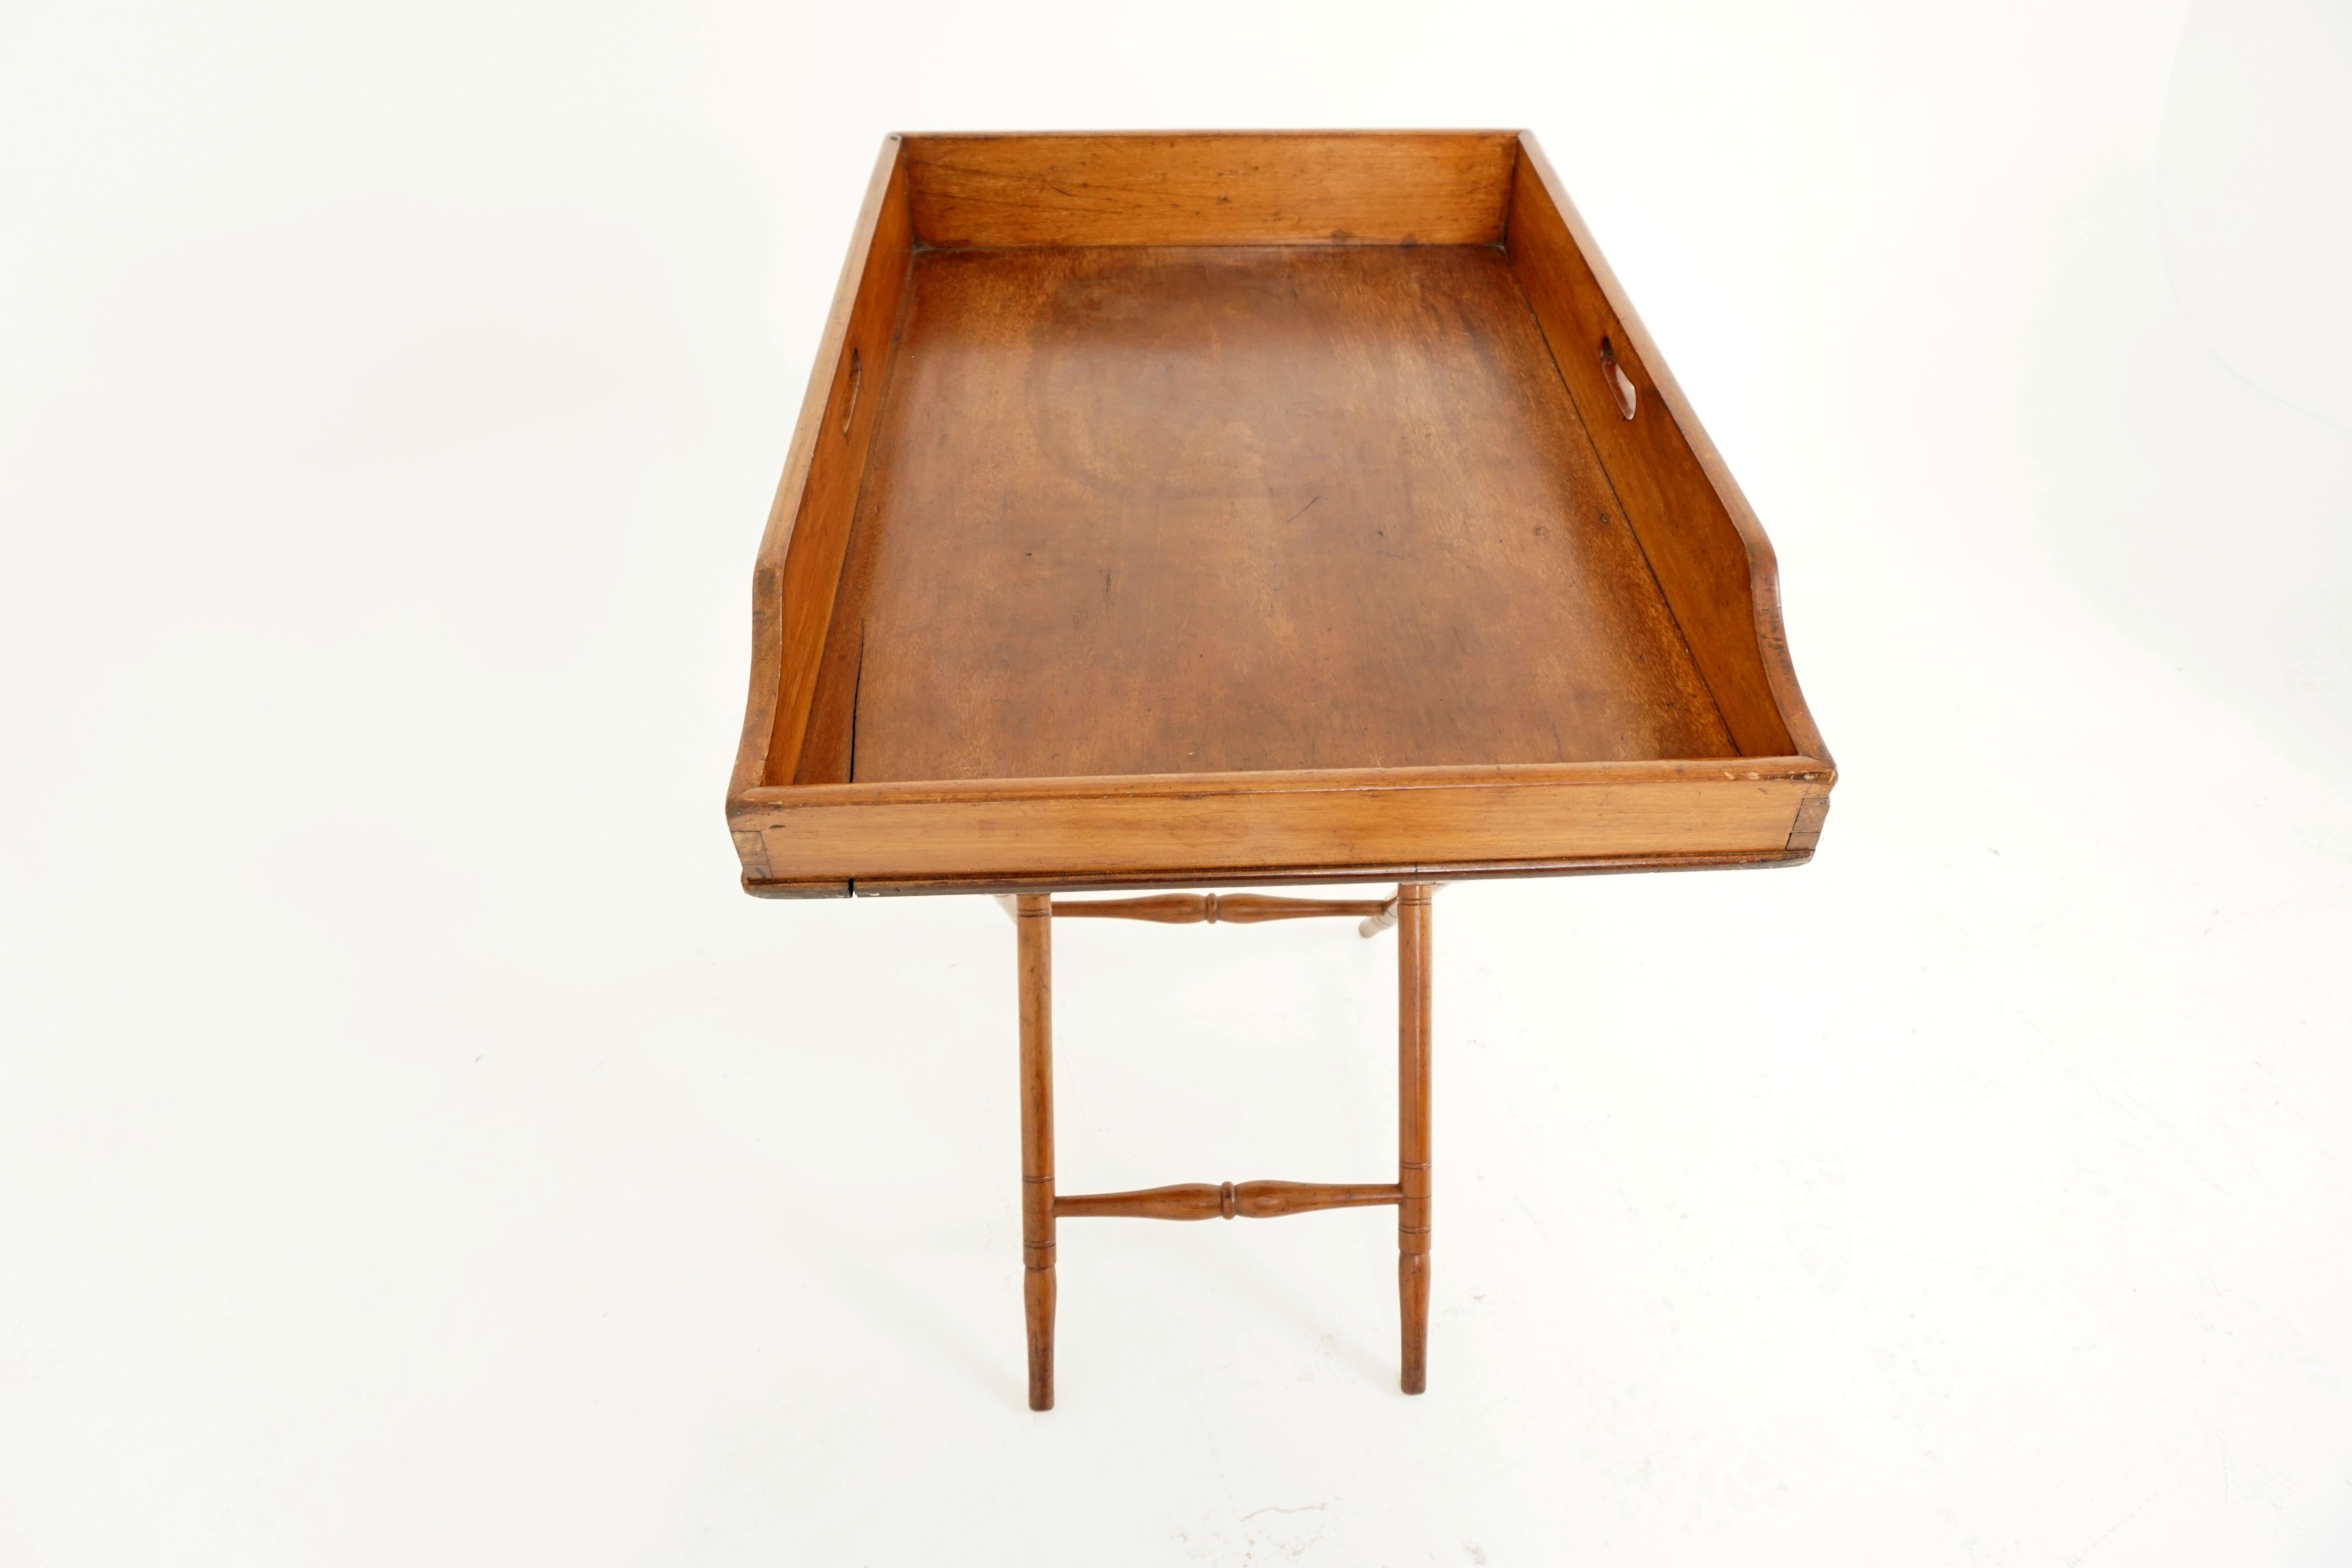 Hand-Crafted Antique Butler's Tray, Victorian Walnut Drinks Stand, Scotland 1870, B2034